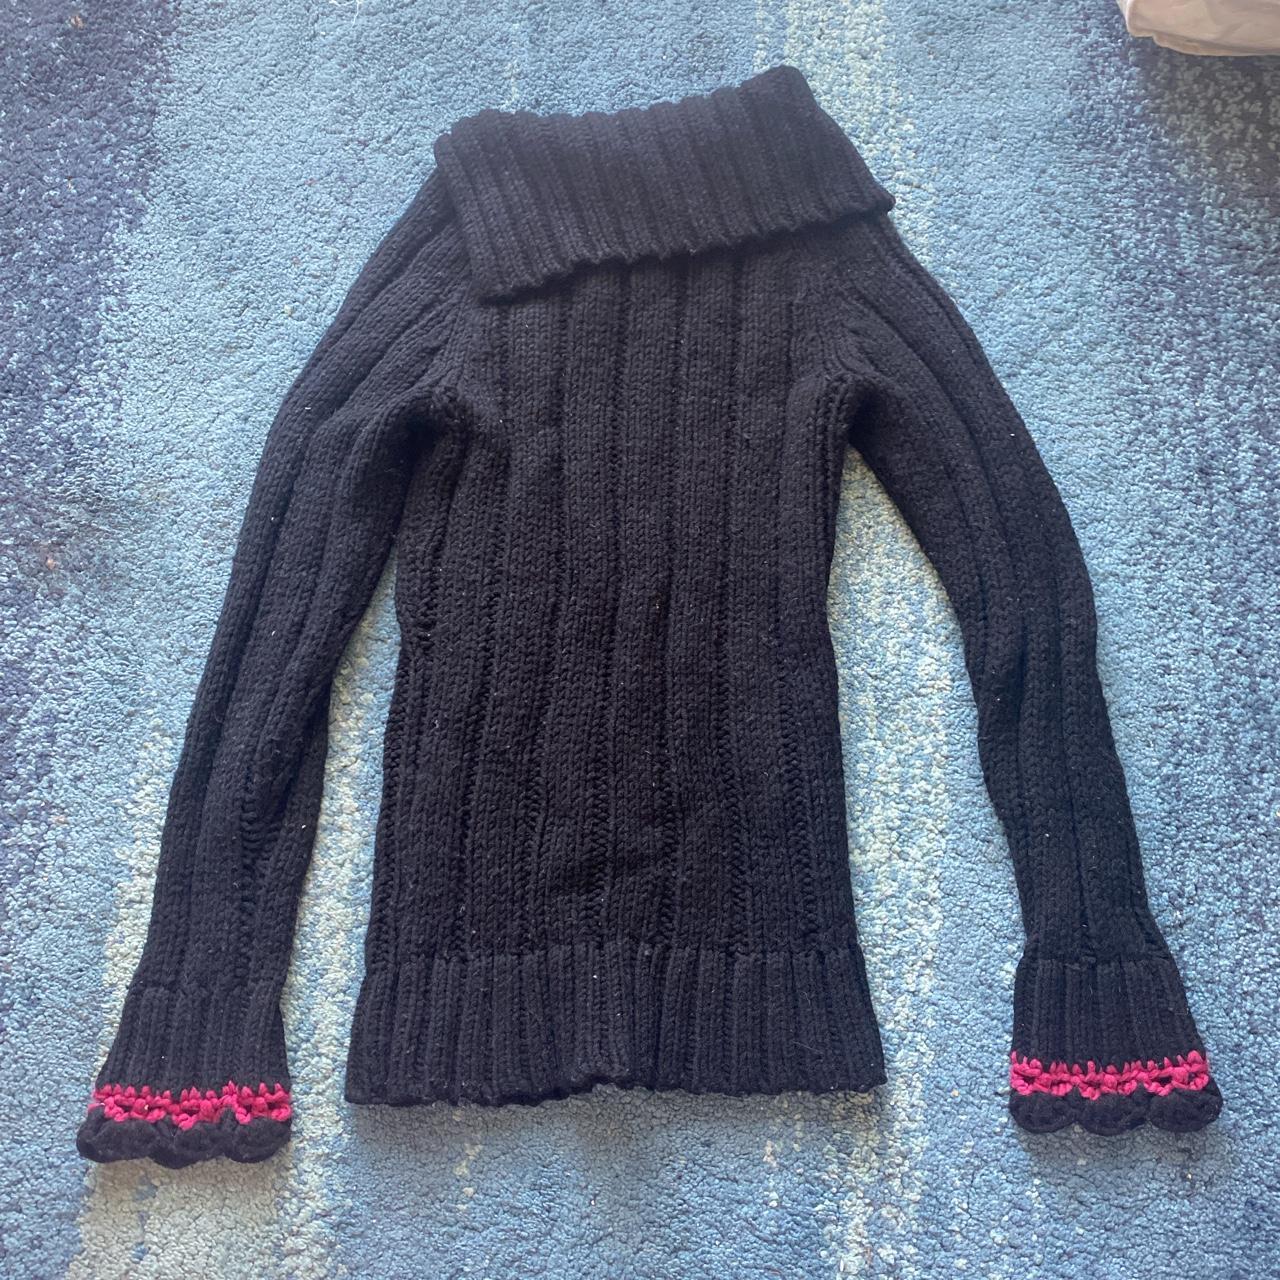 Guess Women's Black and Pink Jumper (2)